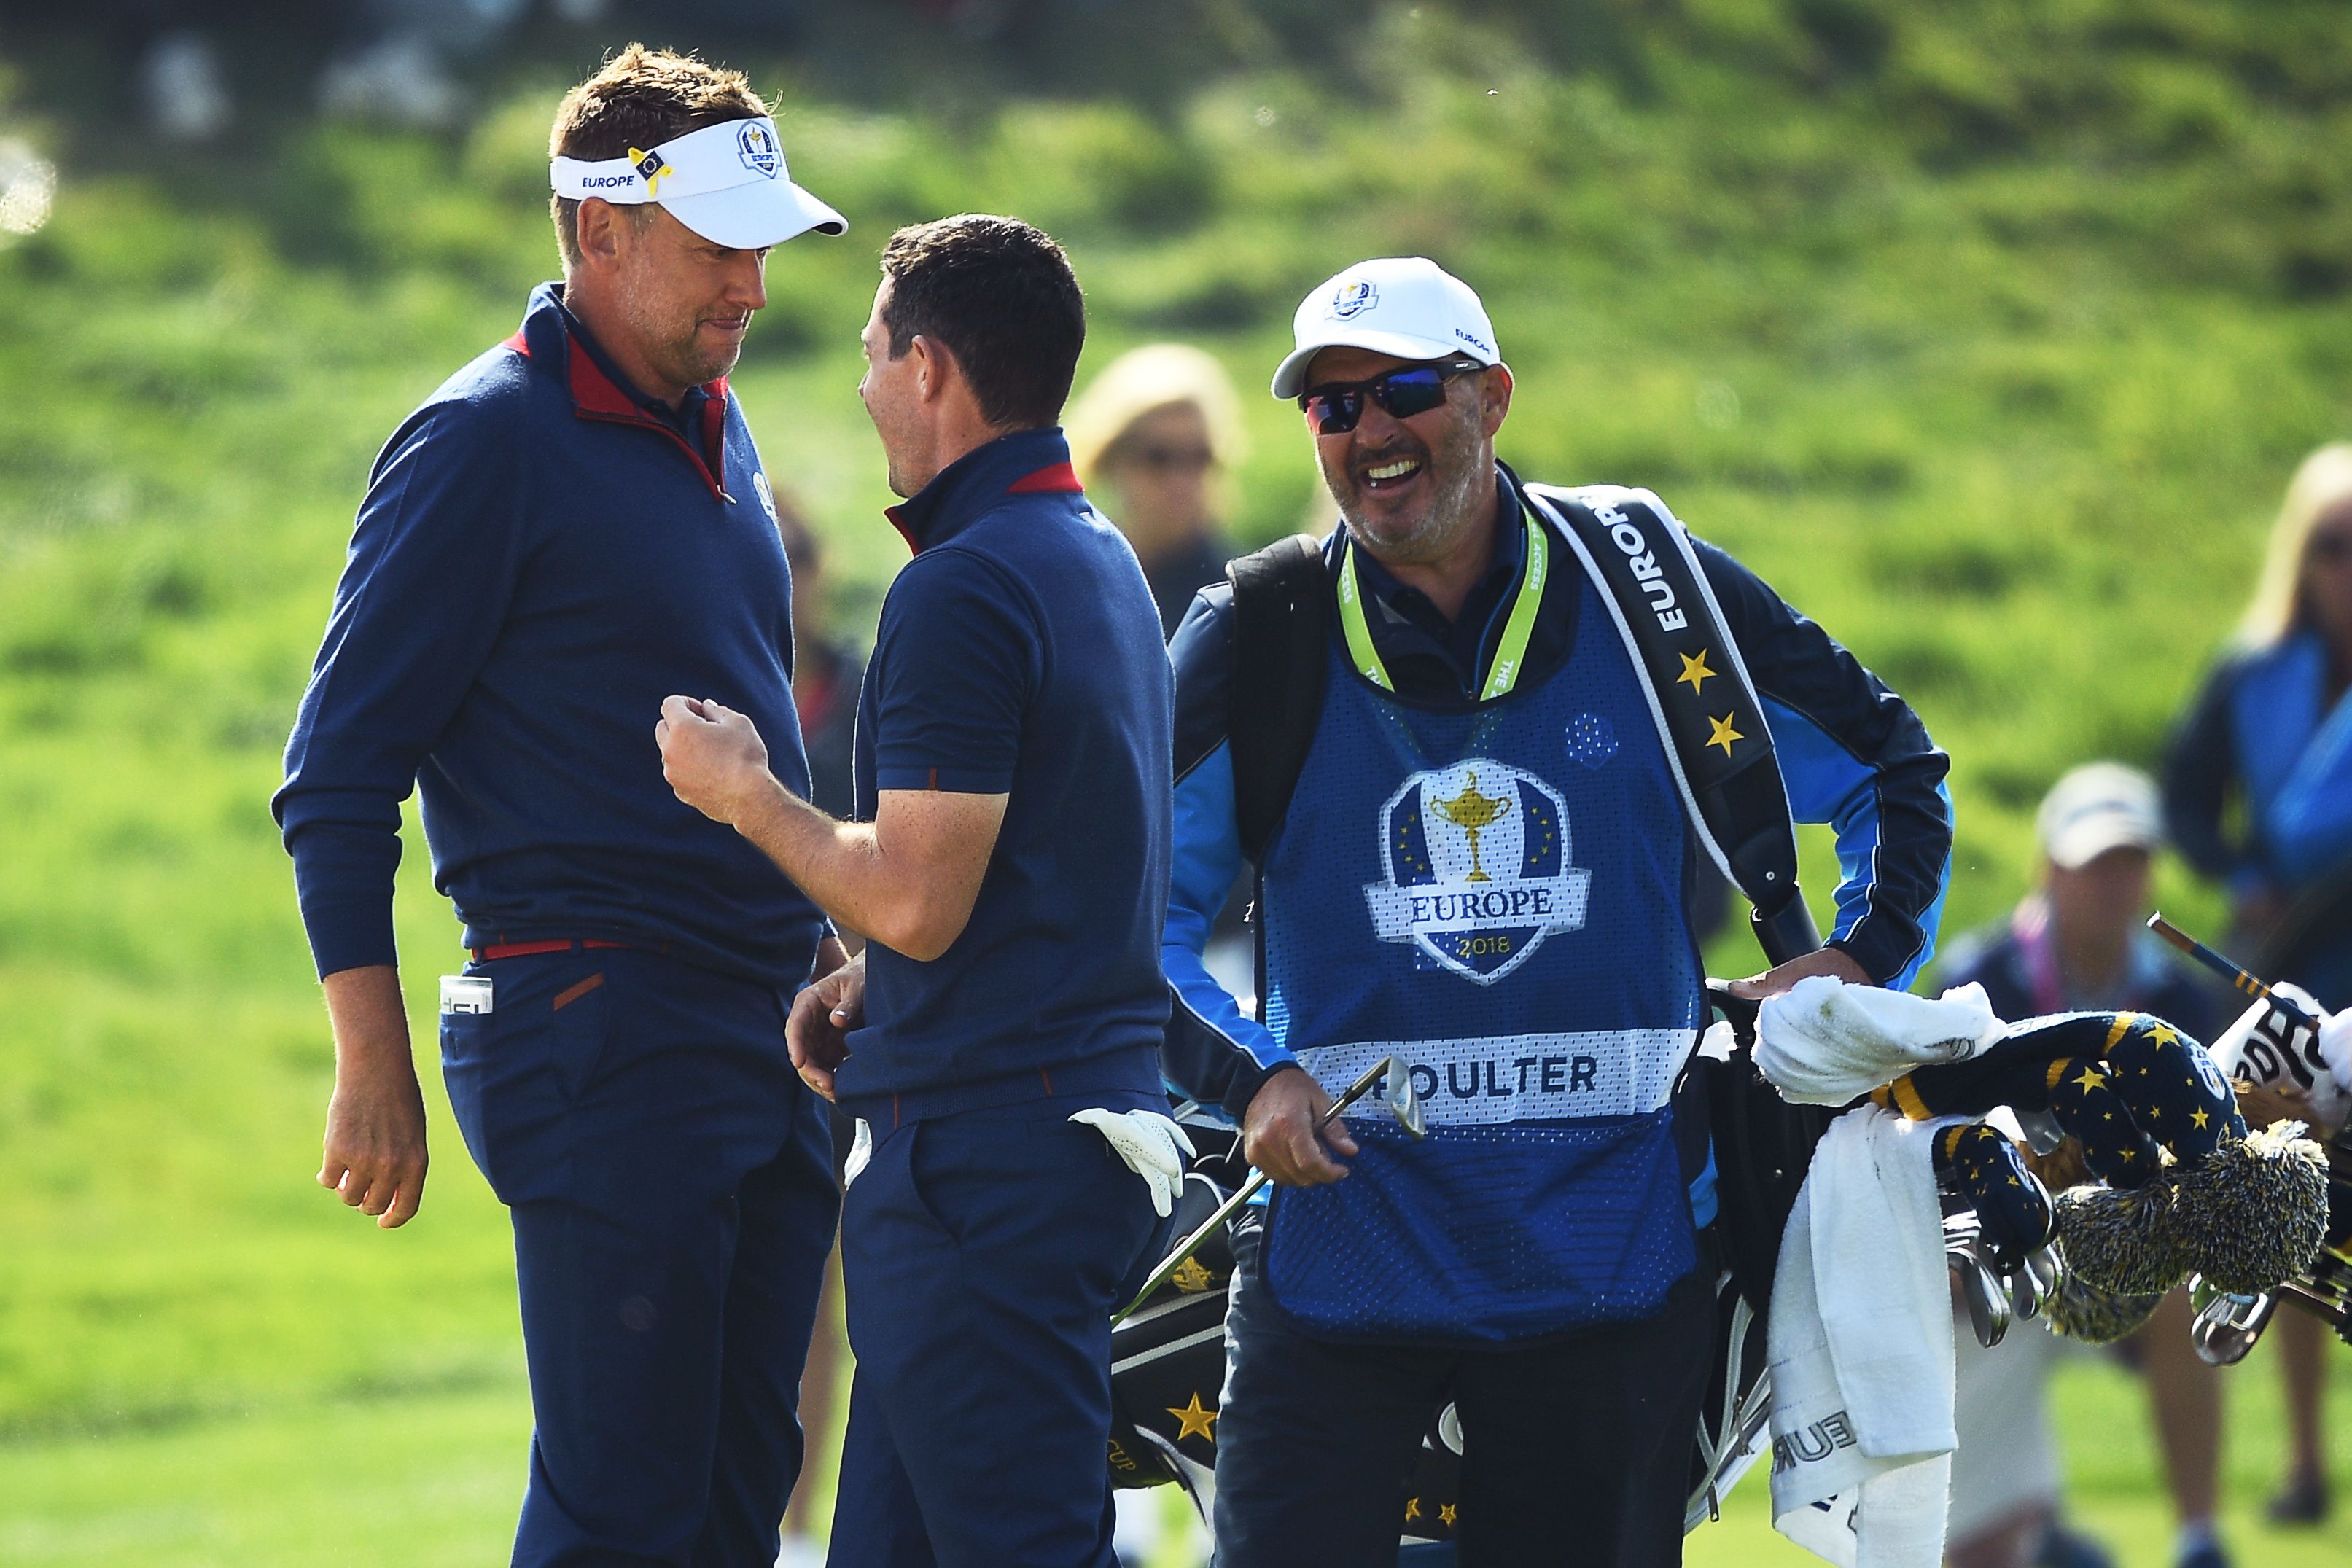 Europe seal 4-0 whitewash in Friday afternoon foursomes at Ryder Cup